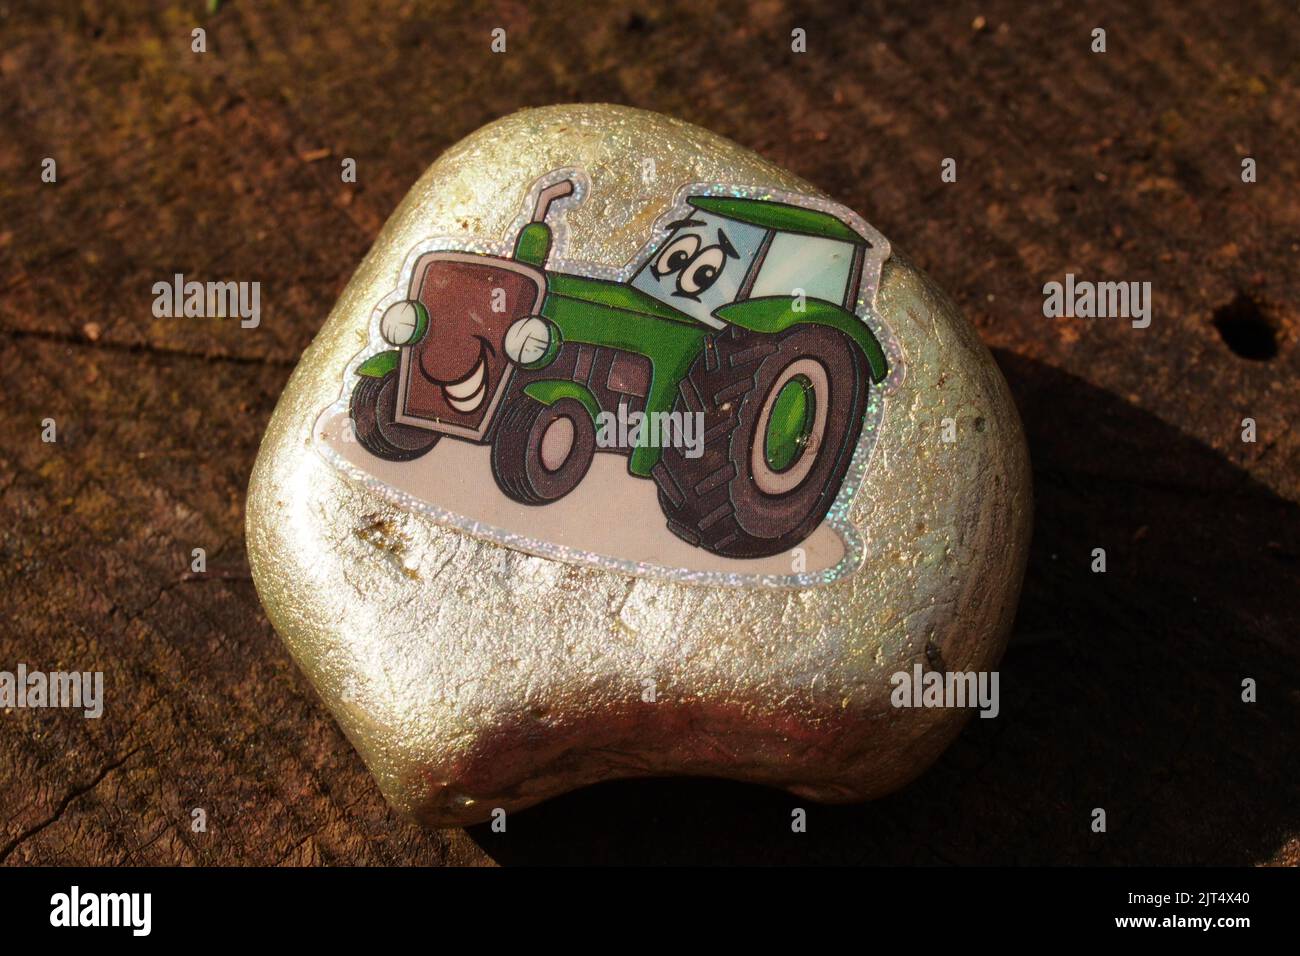 A close up of a stone, pebble, painting of a child's charactor tractor with a face Stock Photo